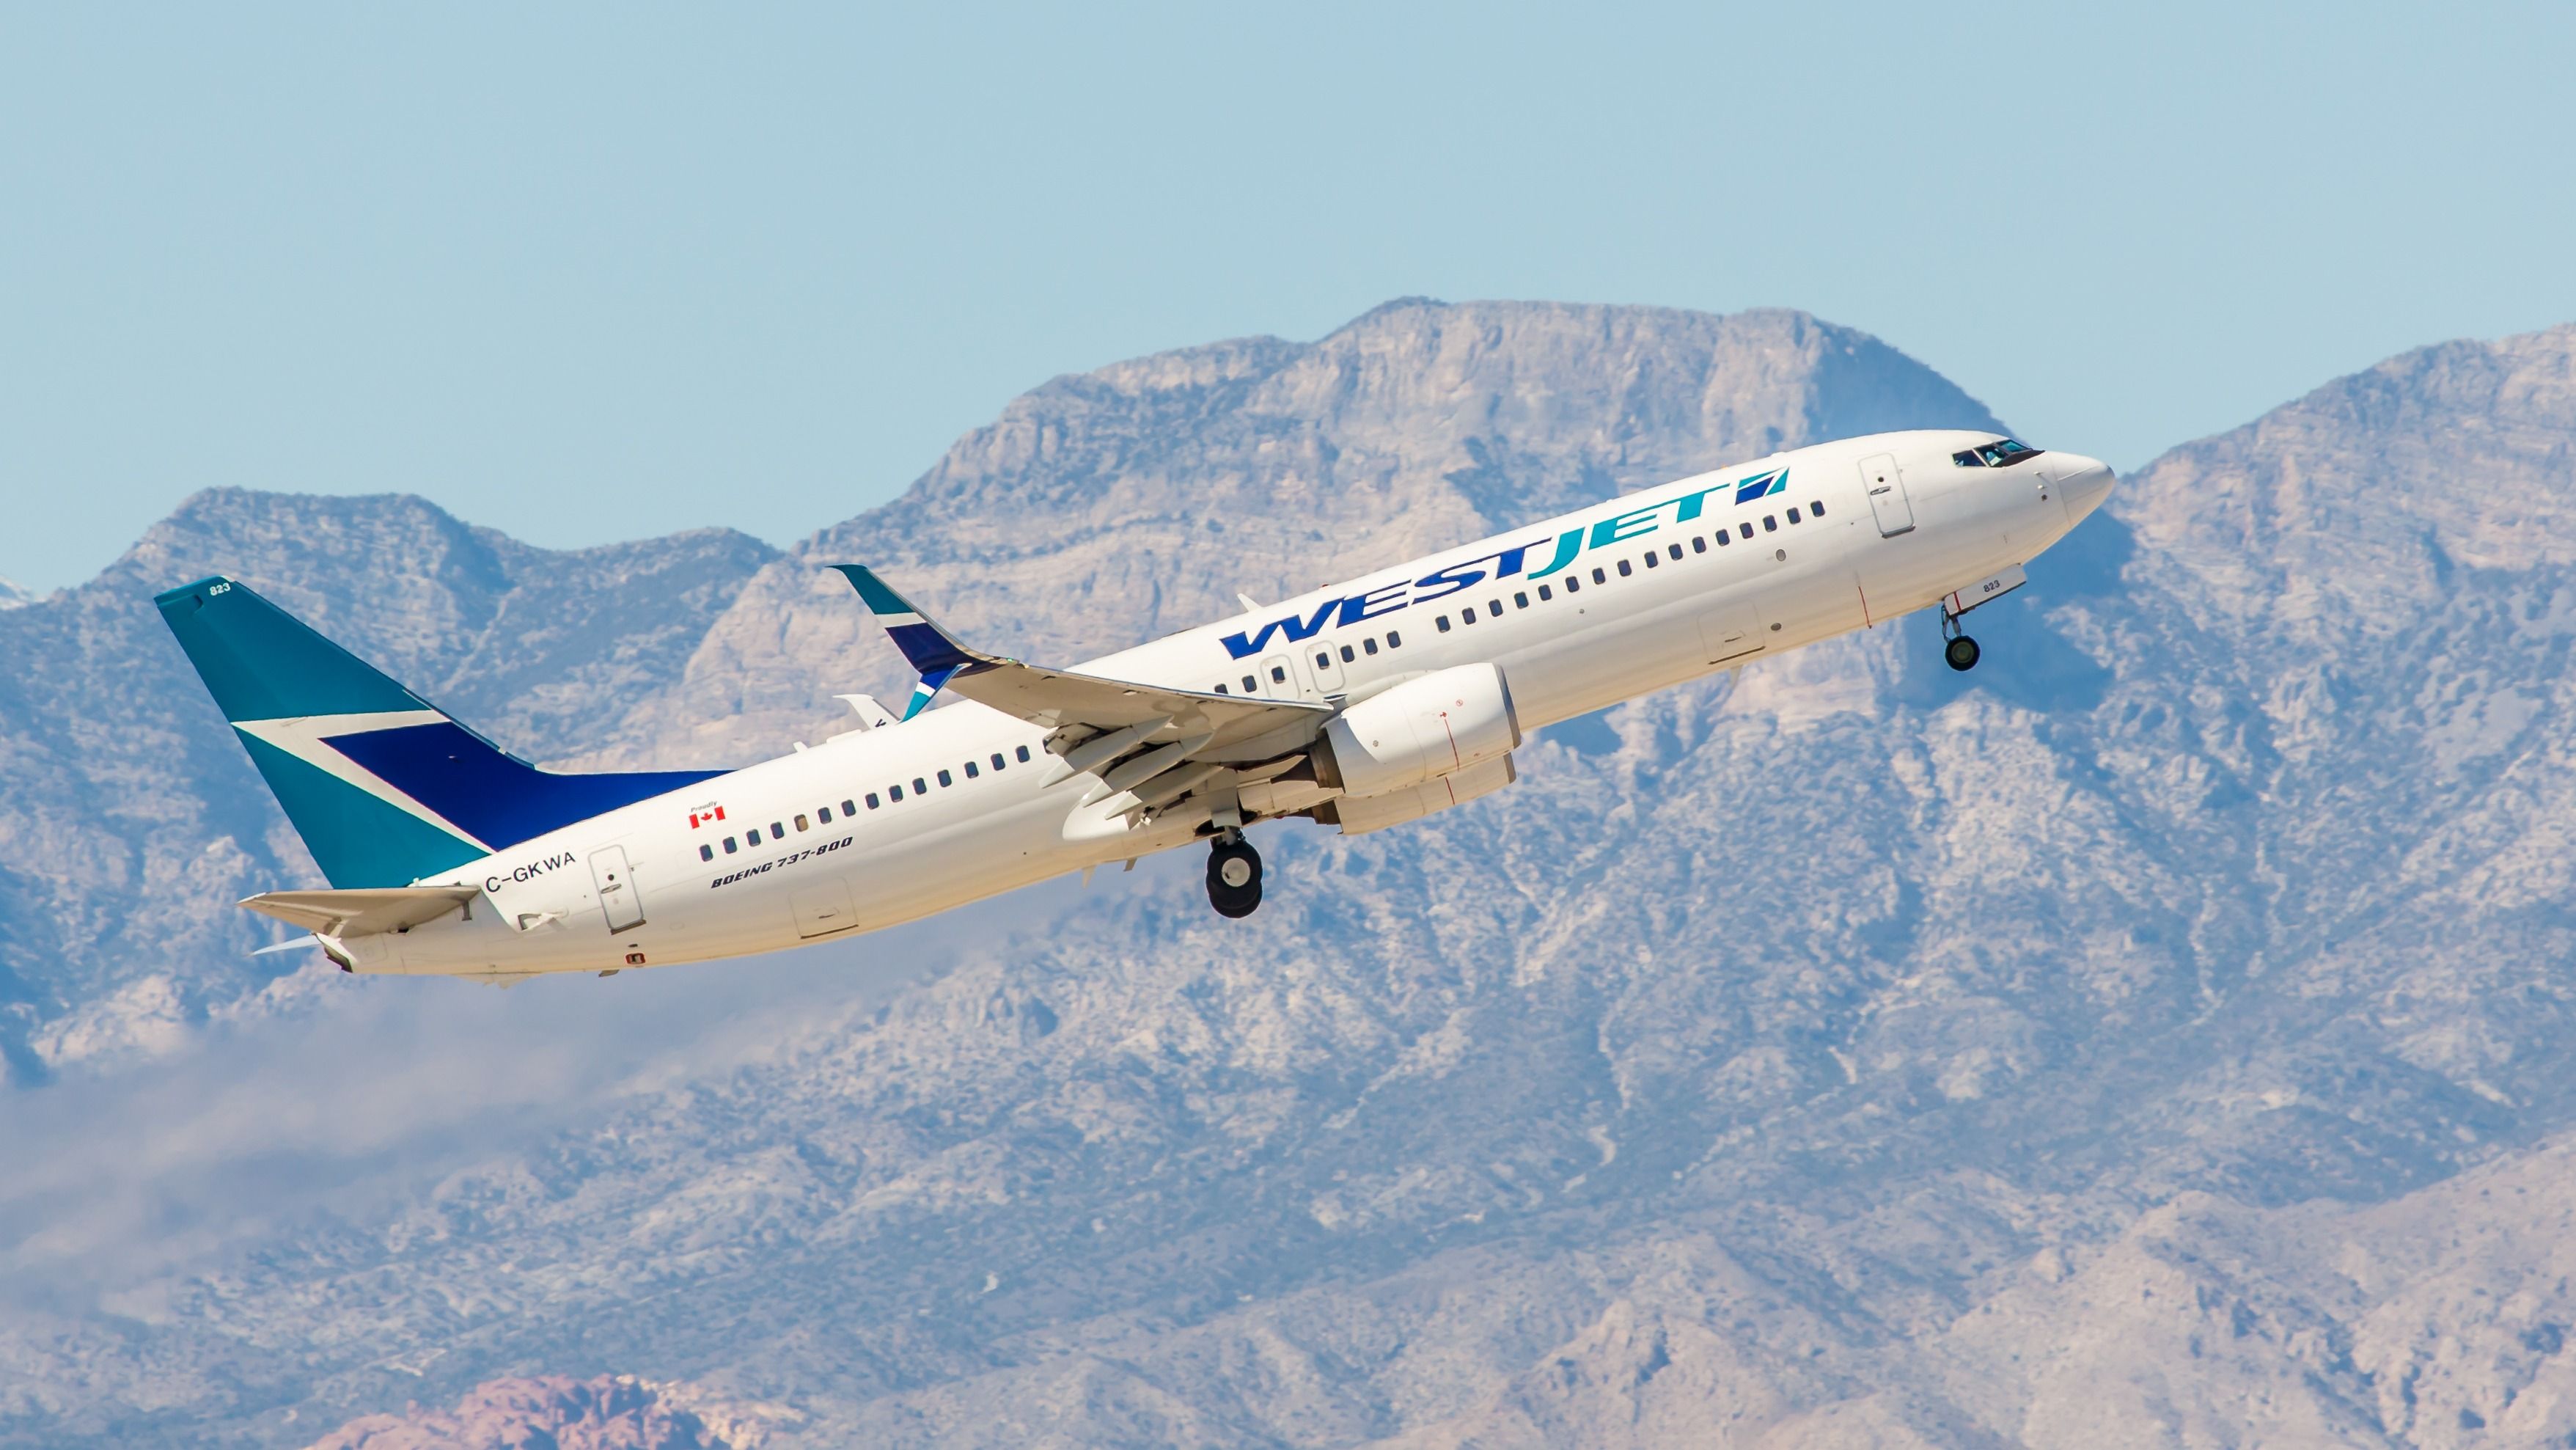 WestJet reaches agreement with mechanics to end strike after contentious negotiations